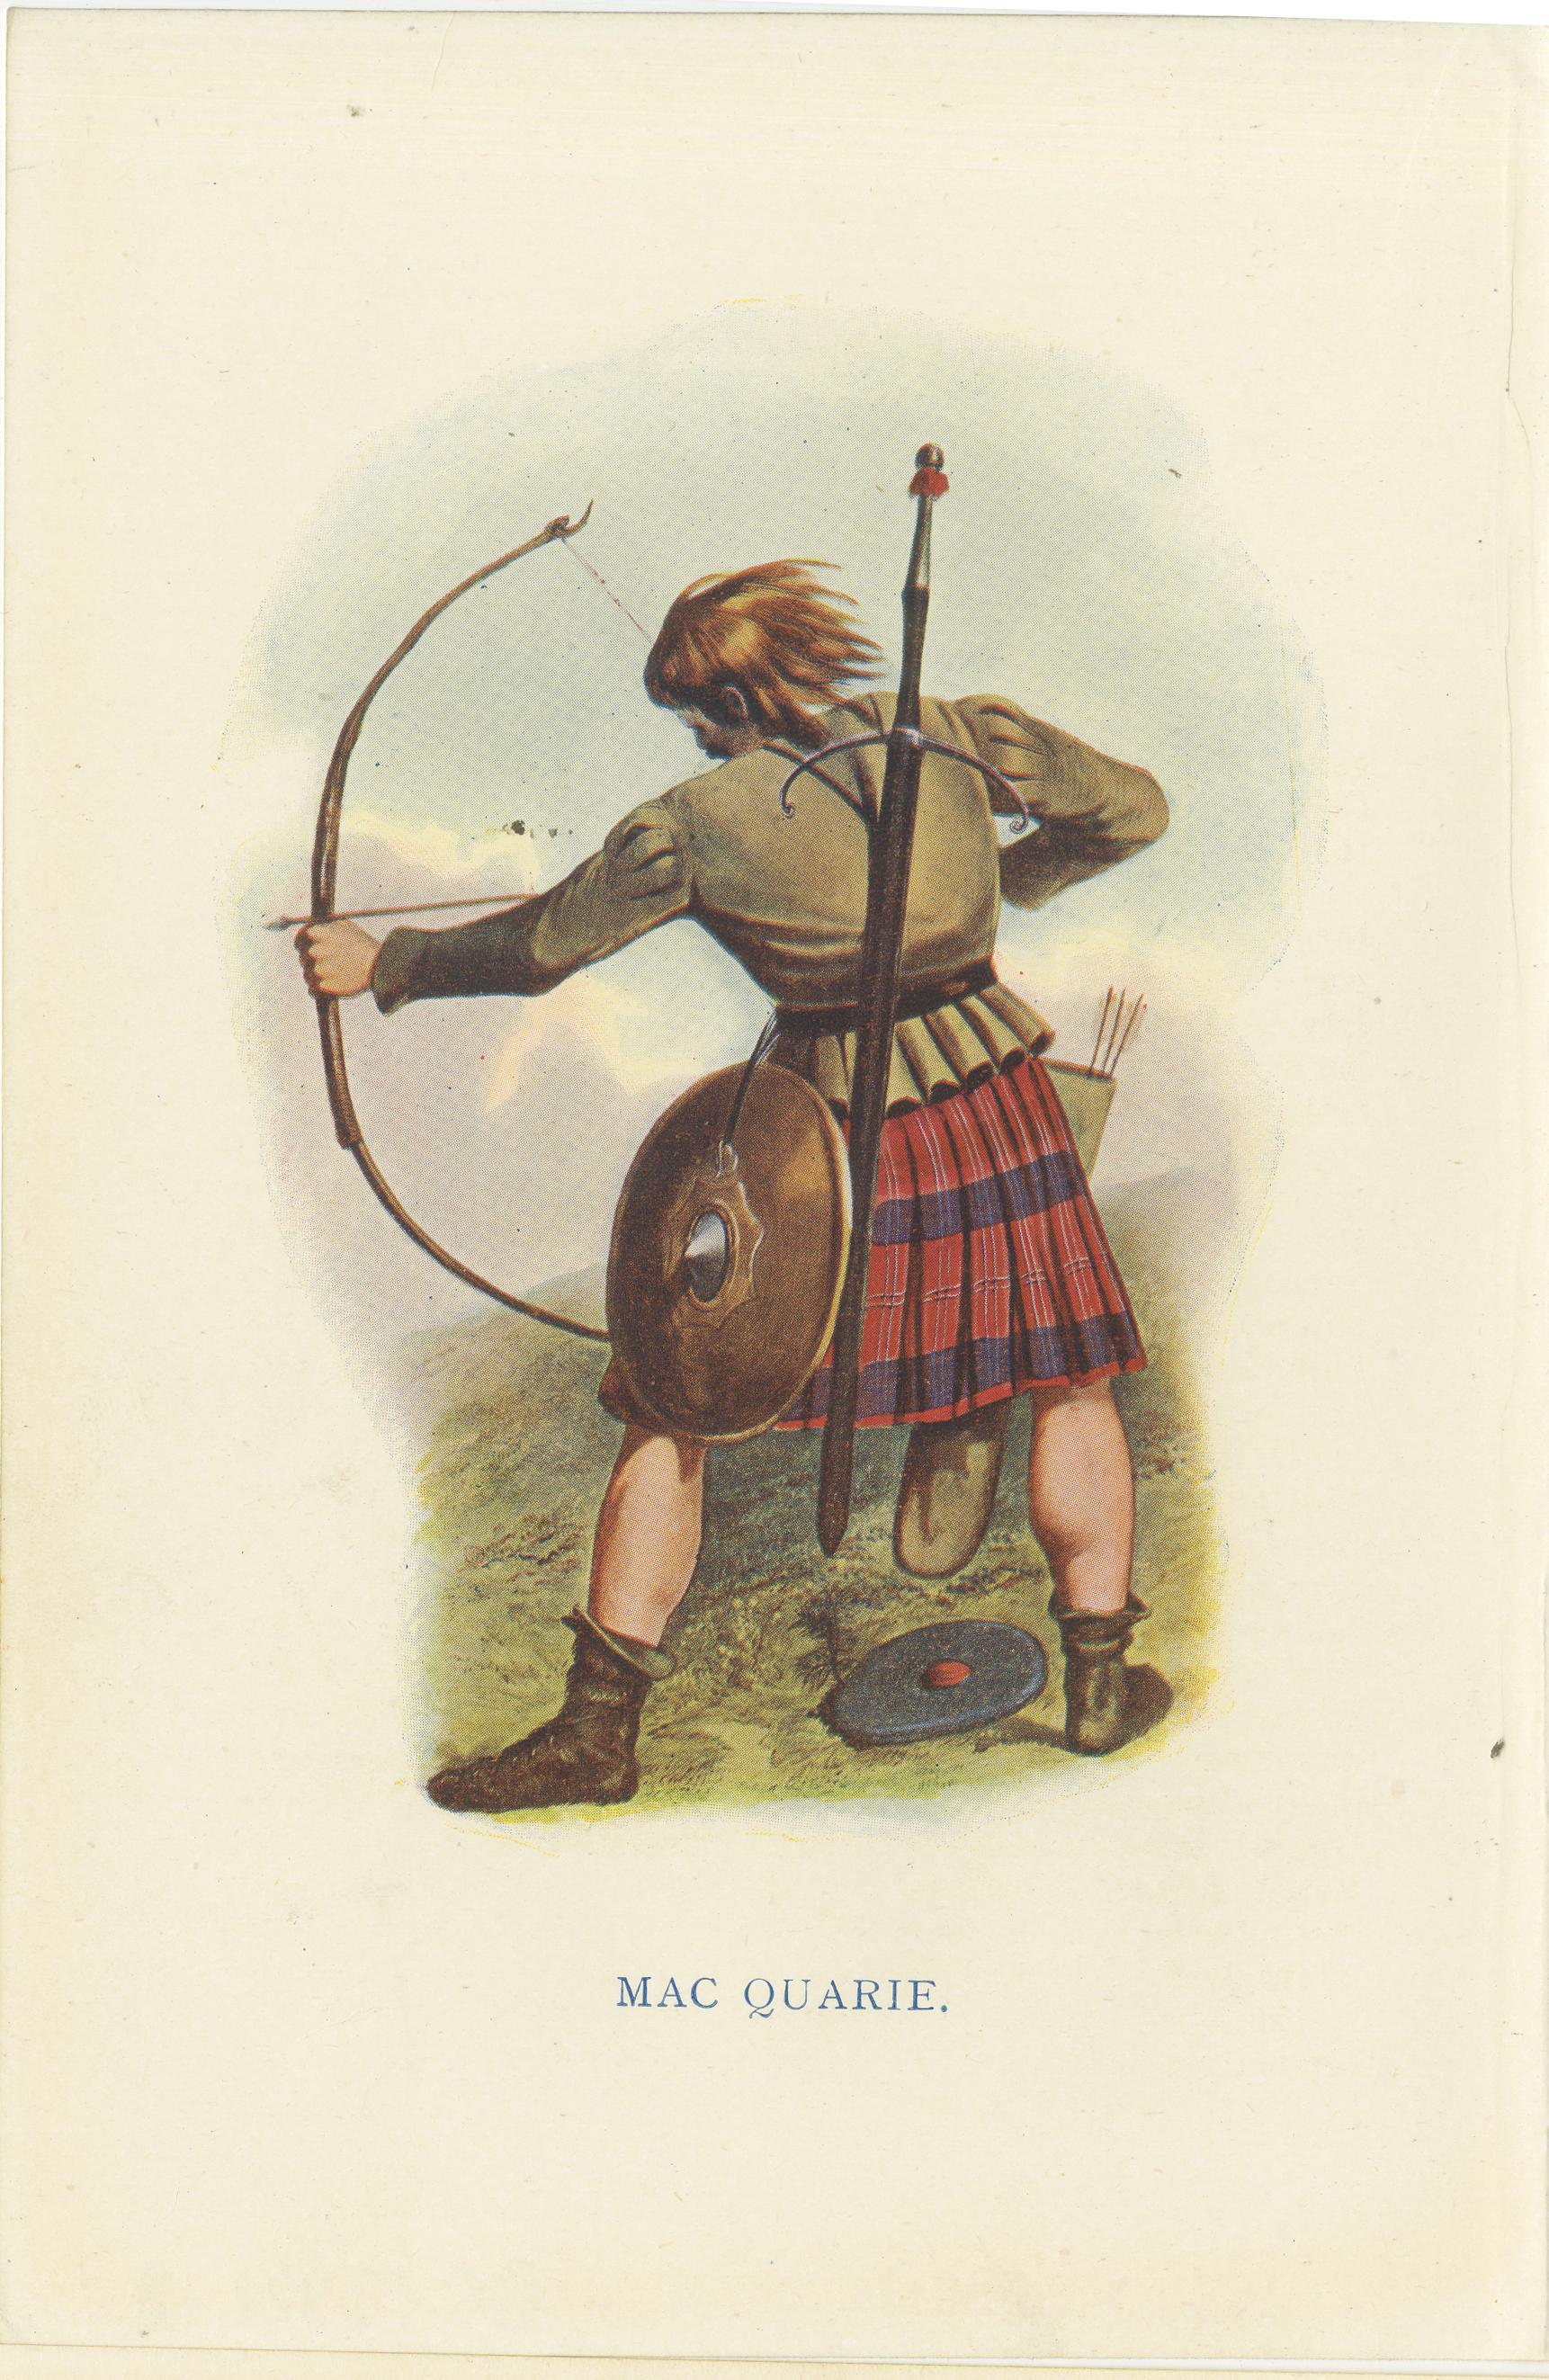 Set of 4 original prints of 'McIan's Costumes of the Clans of Scotland'. Included are: Mac Lachlan, Mac Innes, Ferguson and Mac Quarie. This is the reprint of the famous 1845 version, published by David Bryce and Sons, Glasgow, 1899.